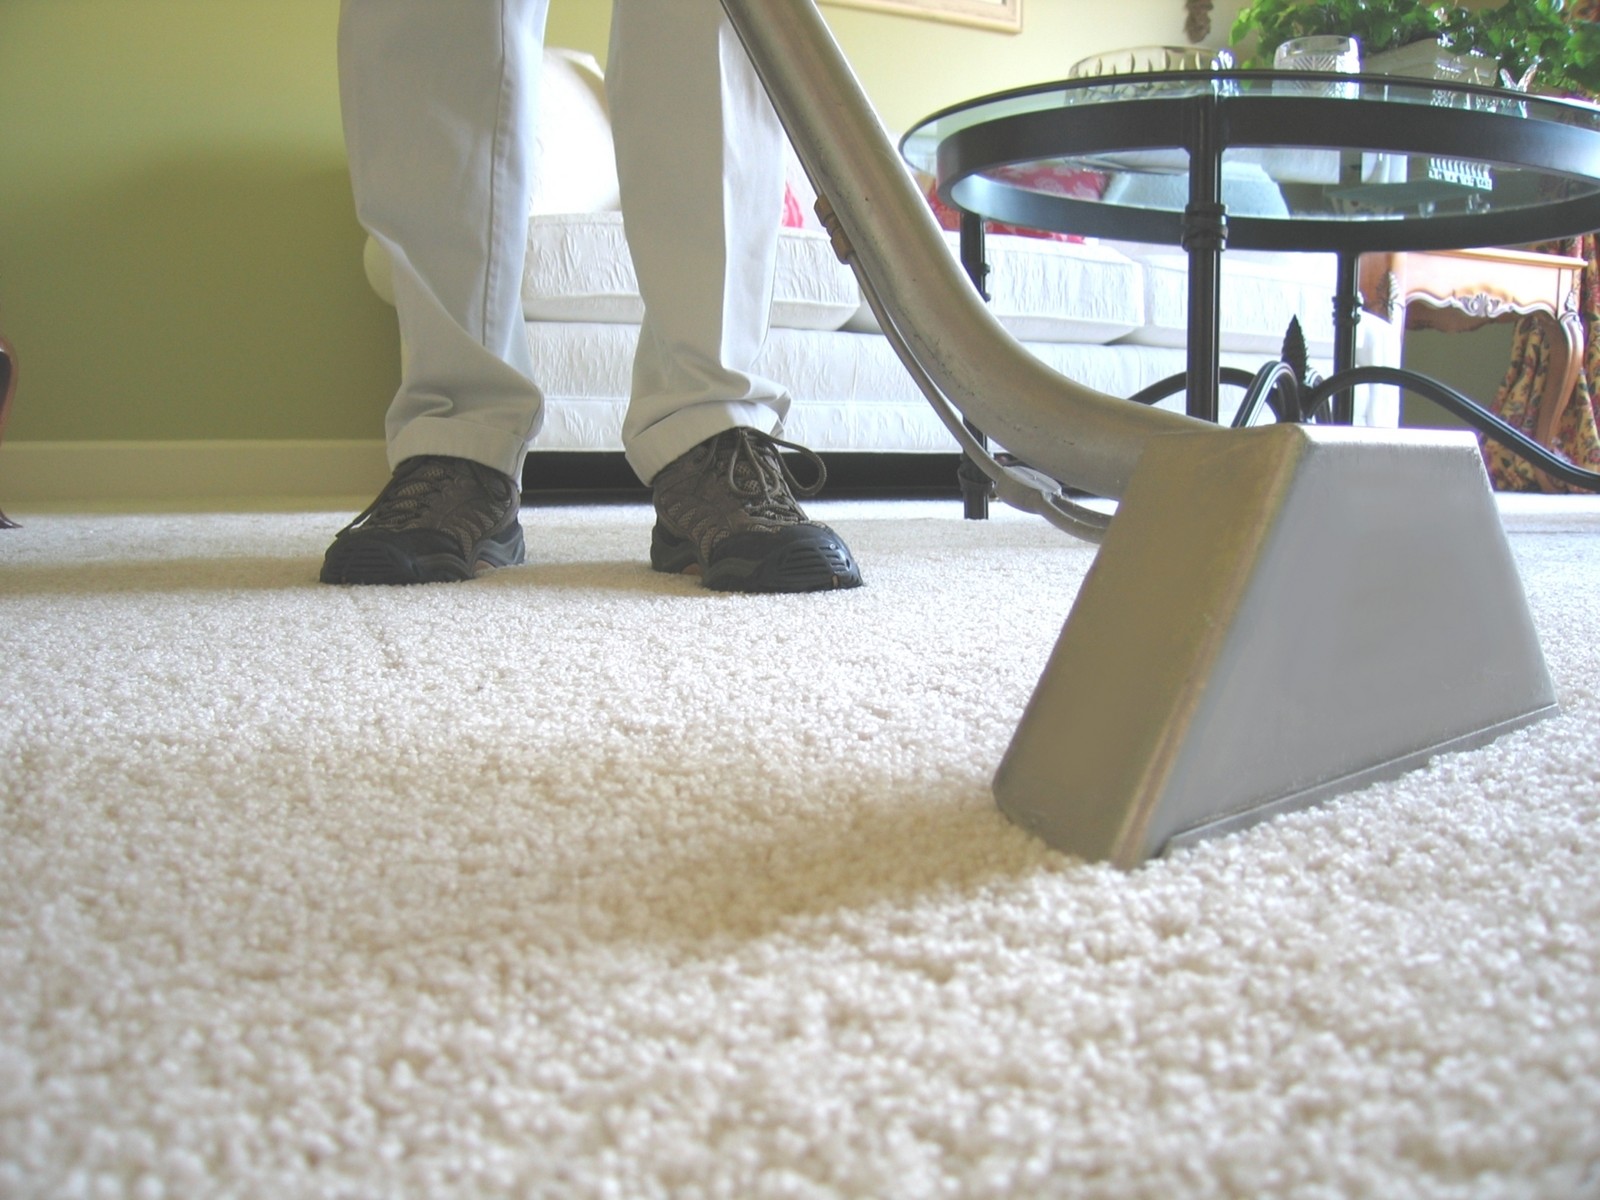 Last Time You Professionally Cleaned Your Home Carpets?